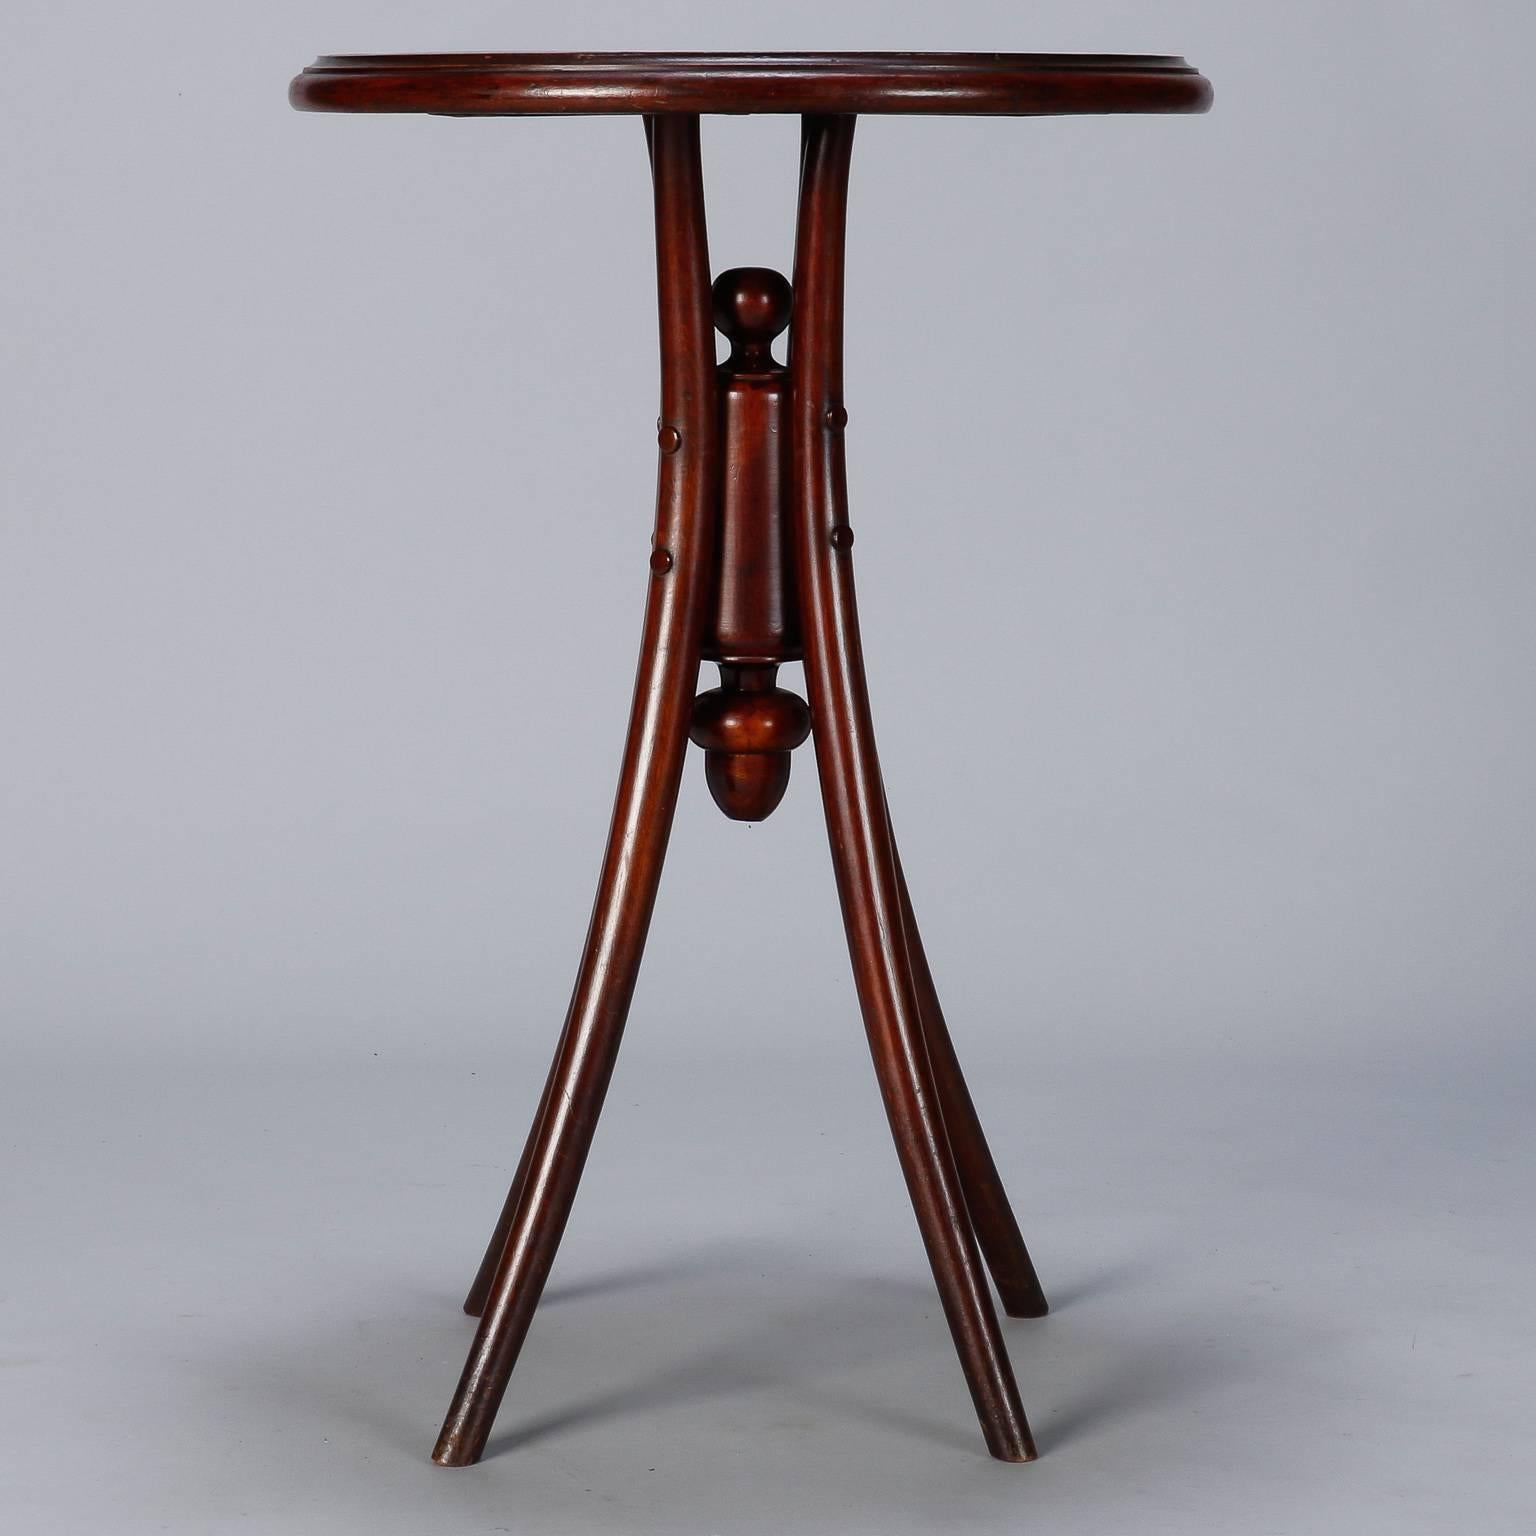 Thonet round side table with four legs and decorative center support, circa 1920s. Veneer on tabletop shows wear and some lifting. Some visible wear to legs.

 